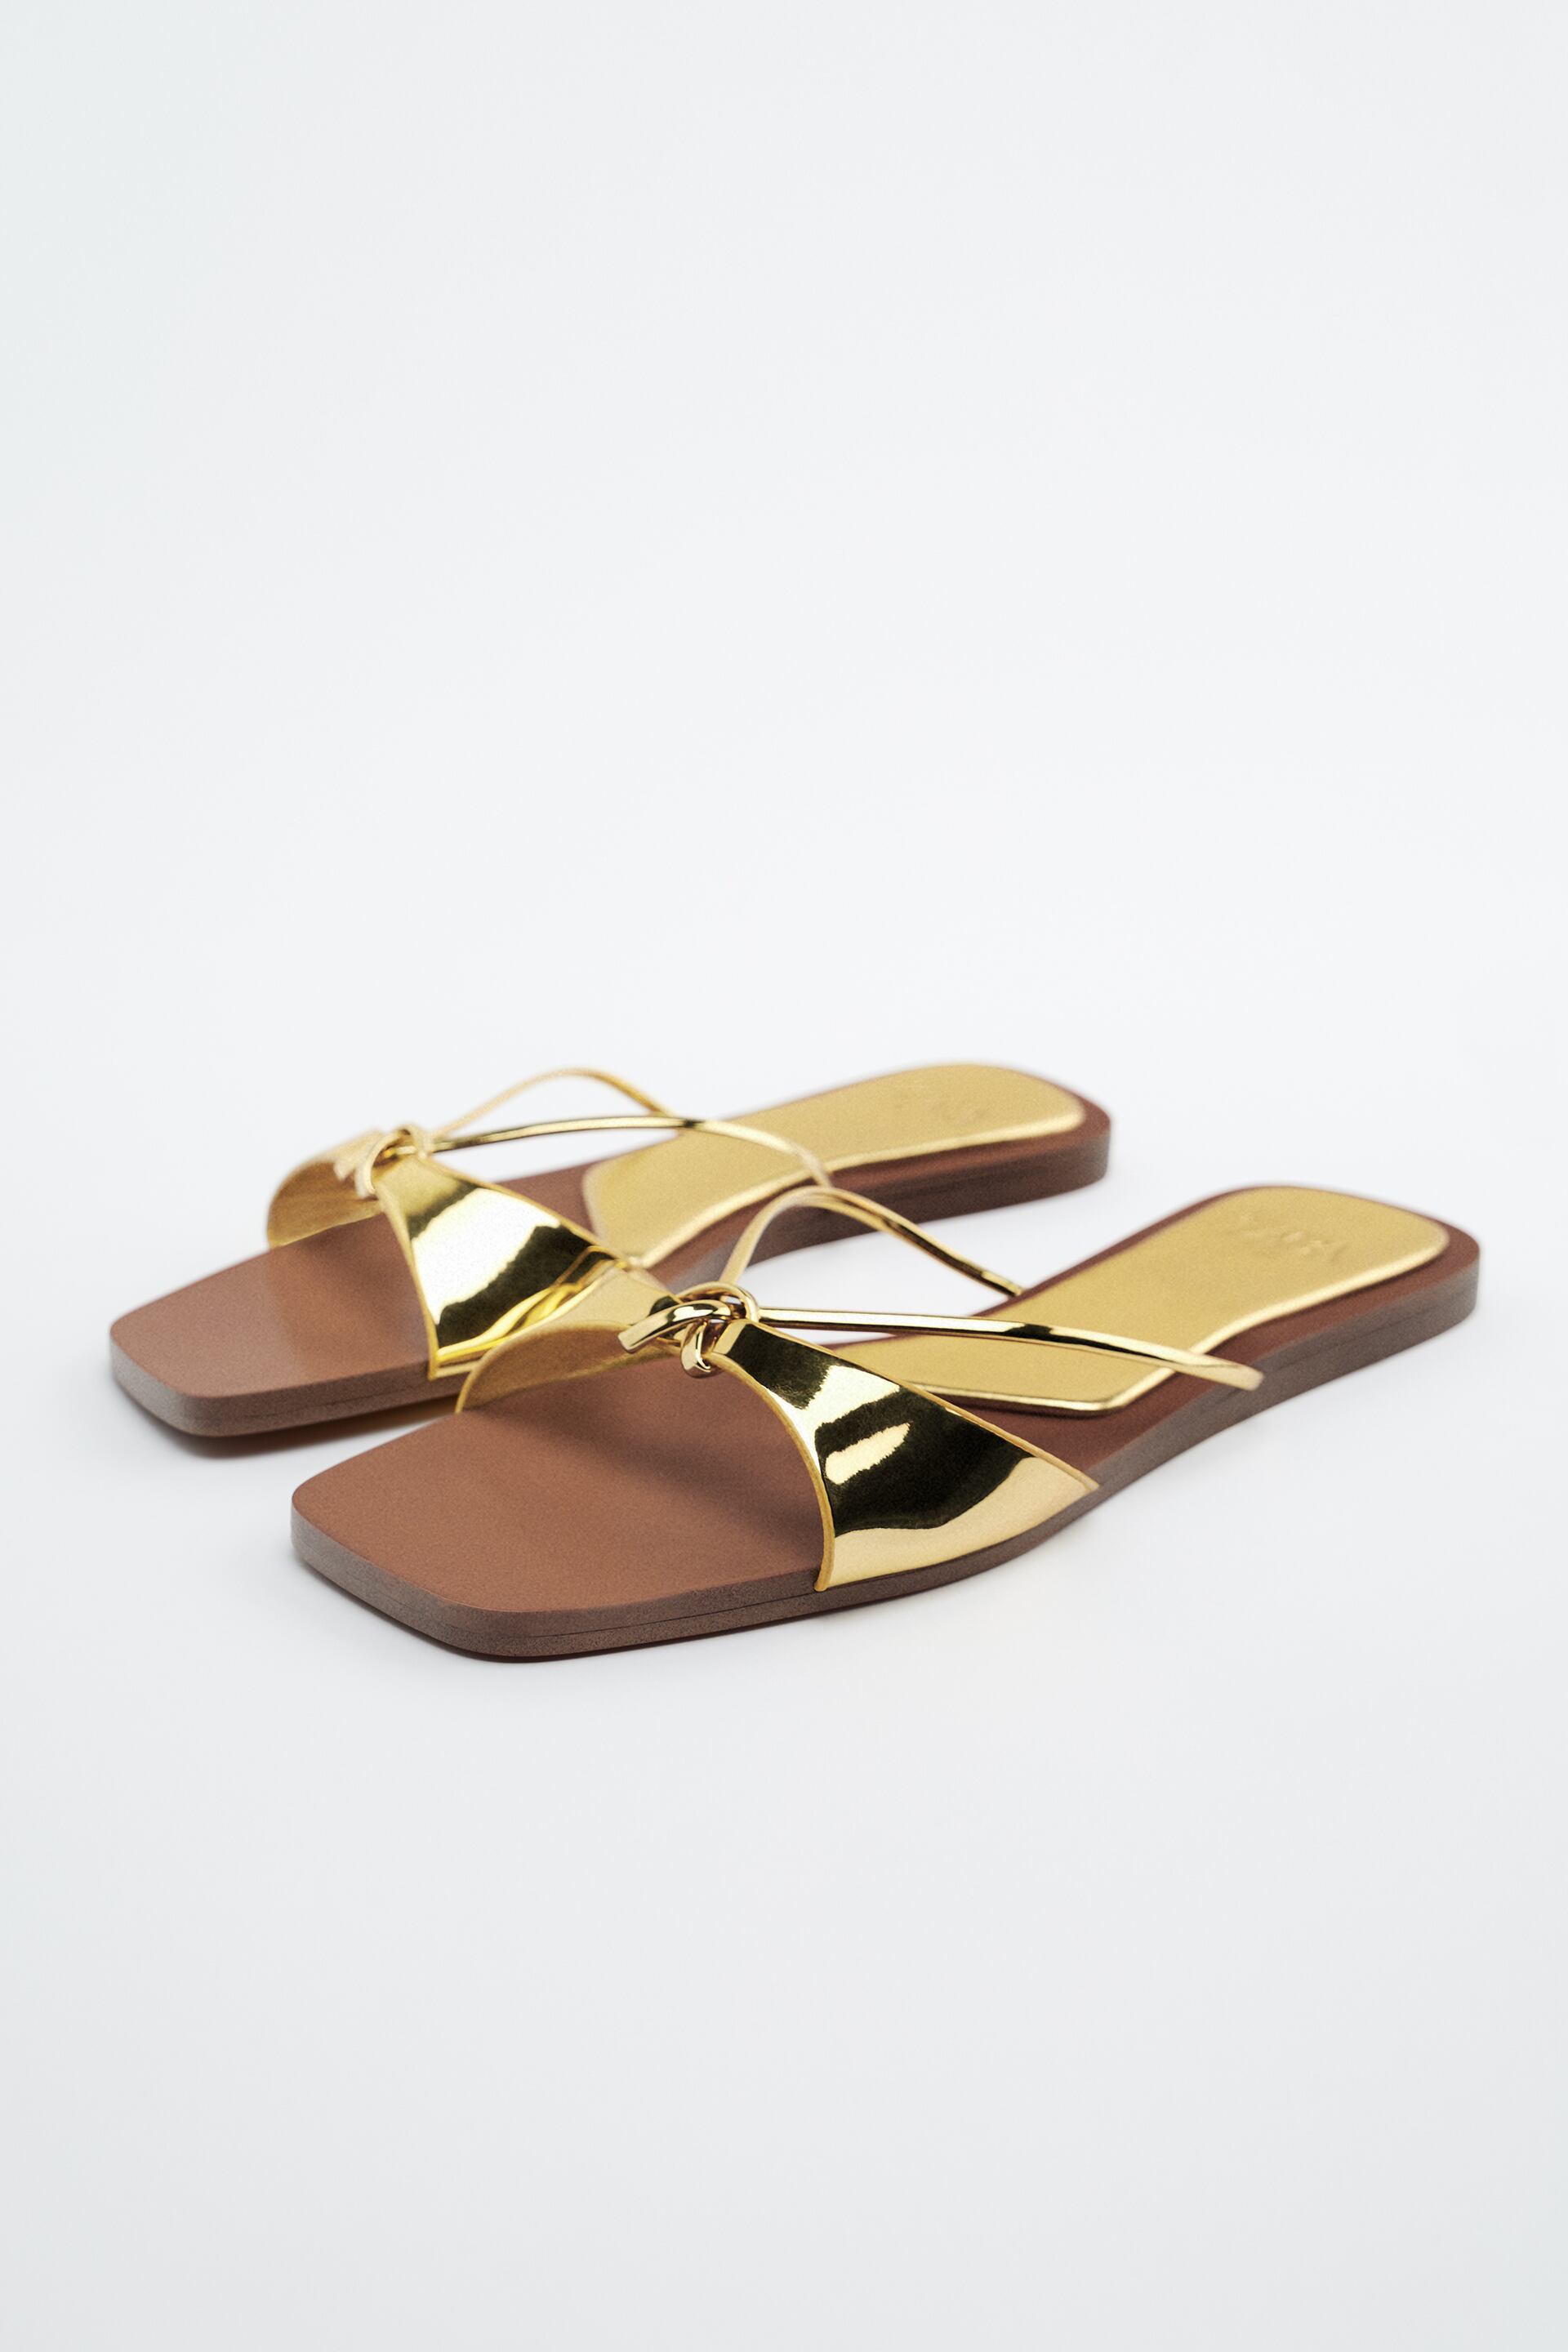 Zara FLAT SANDALS WITH KNOT - 145818619-091-